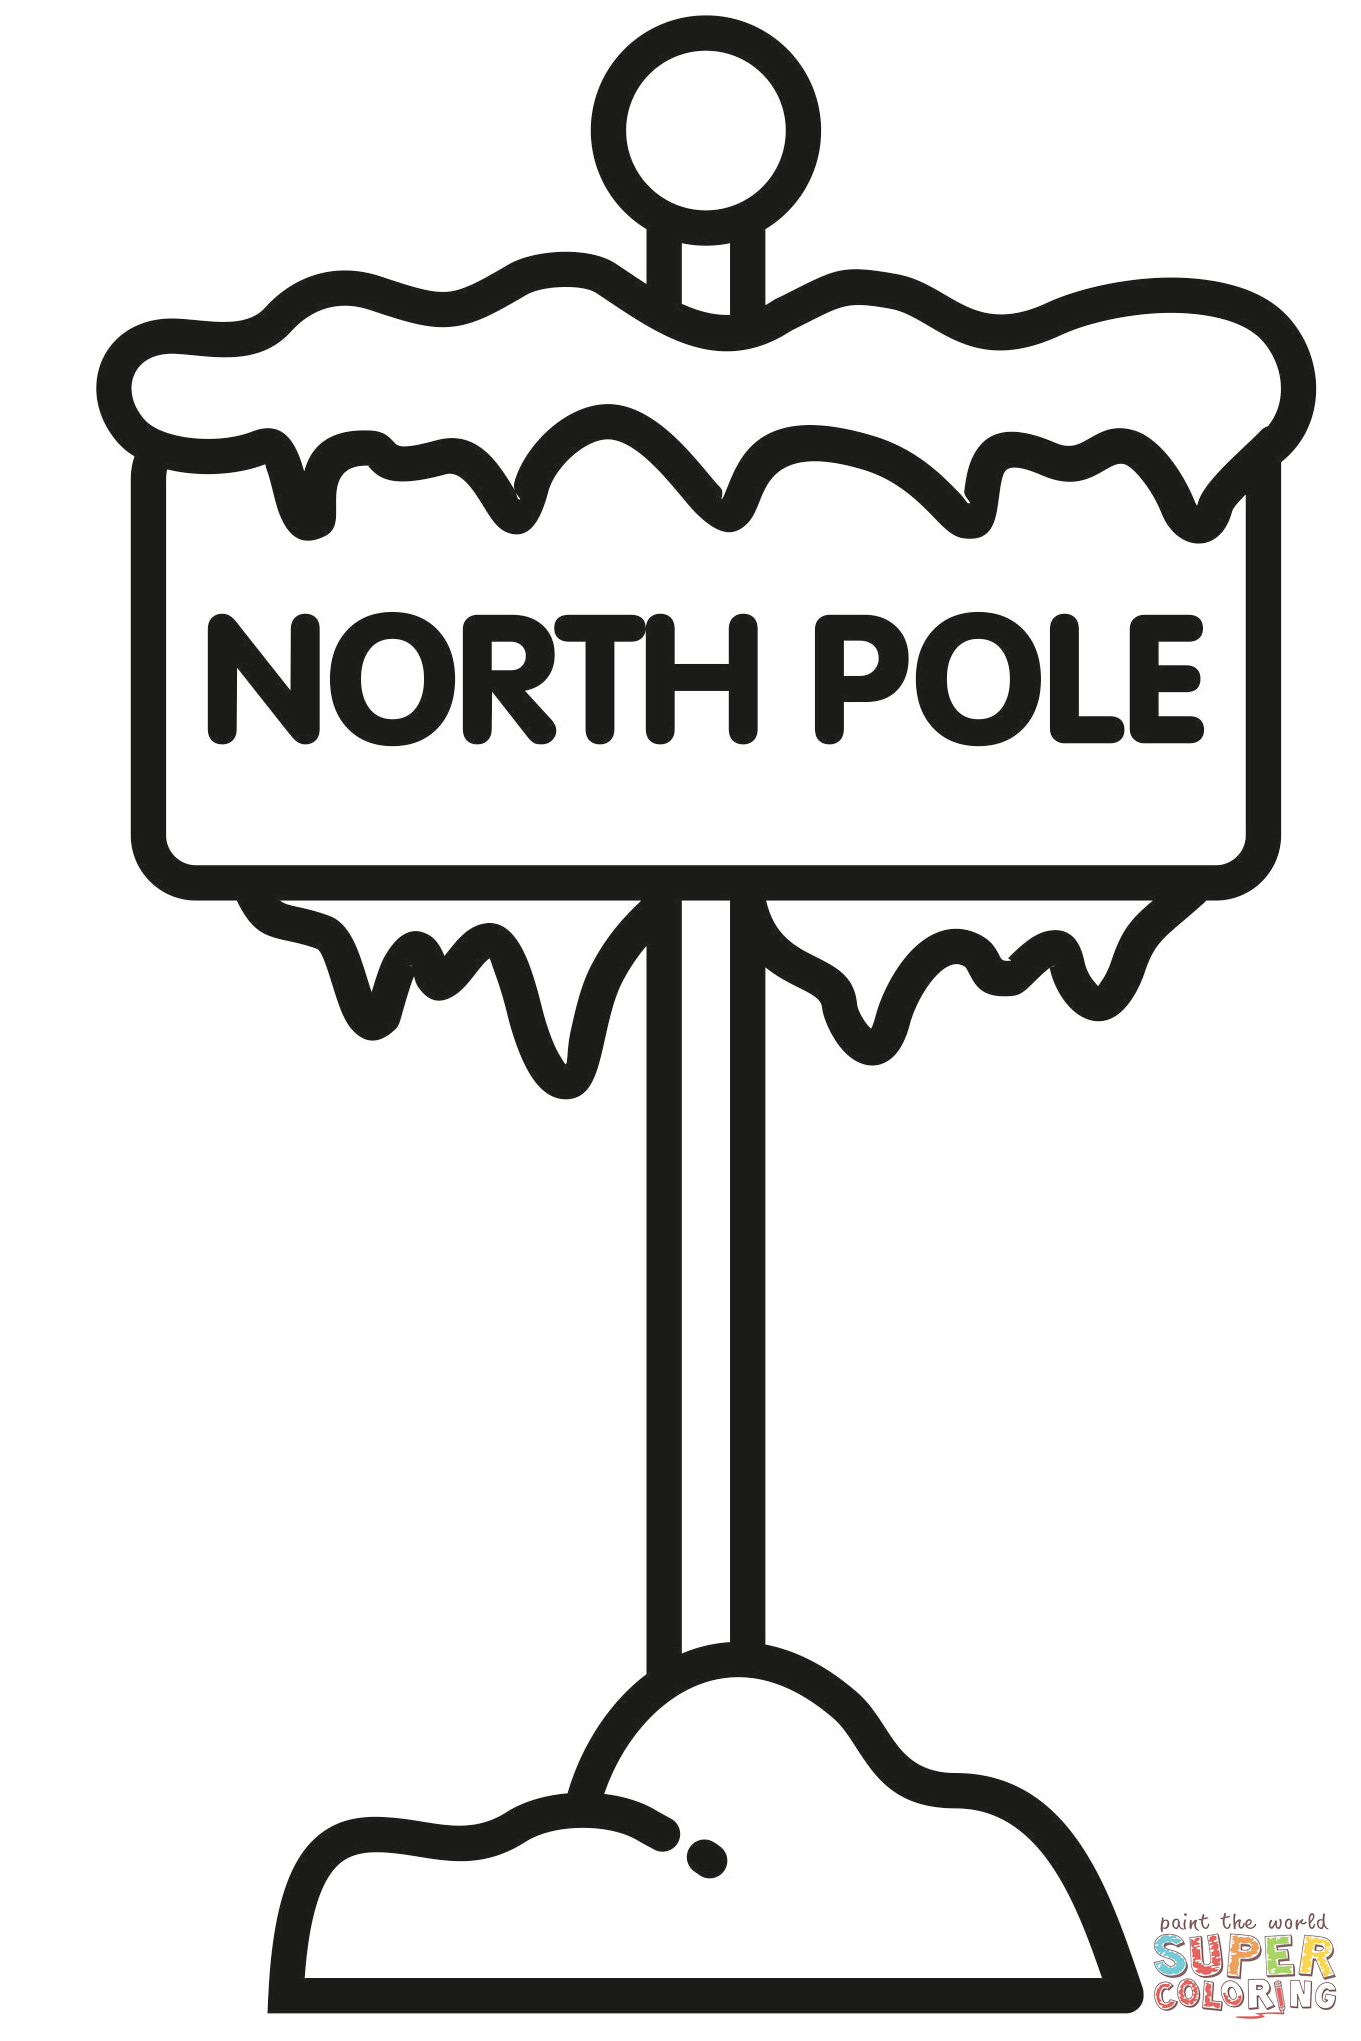 North pole sign coloring page free printable coloring pages